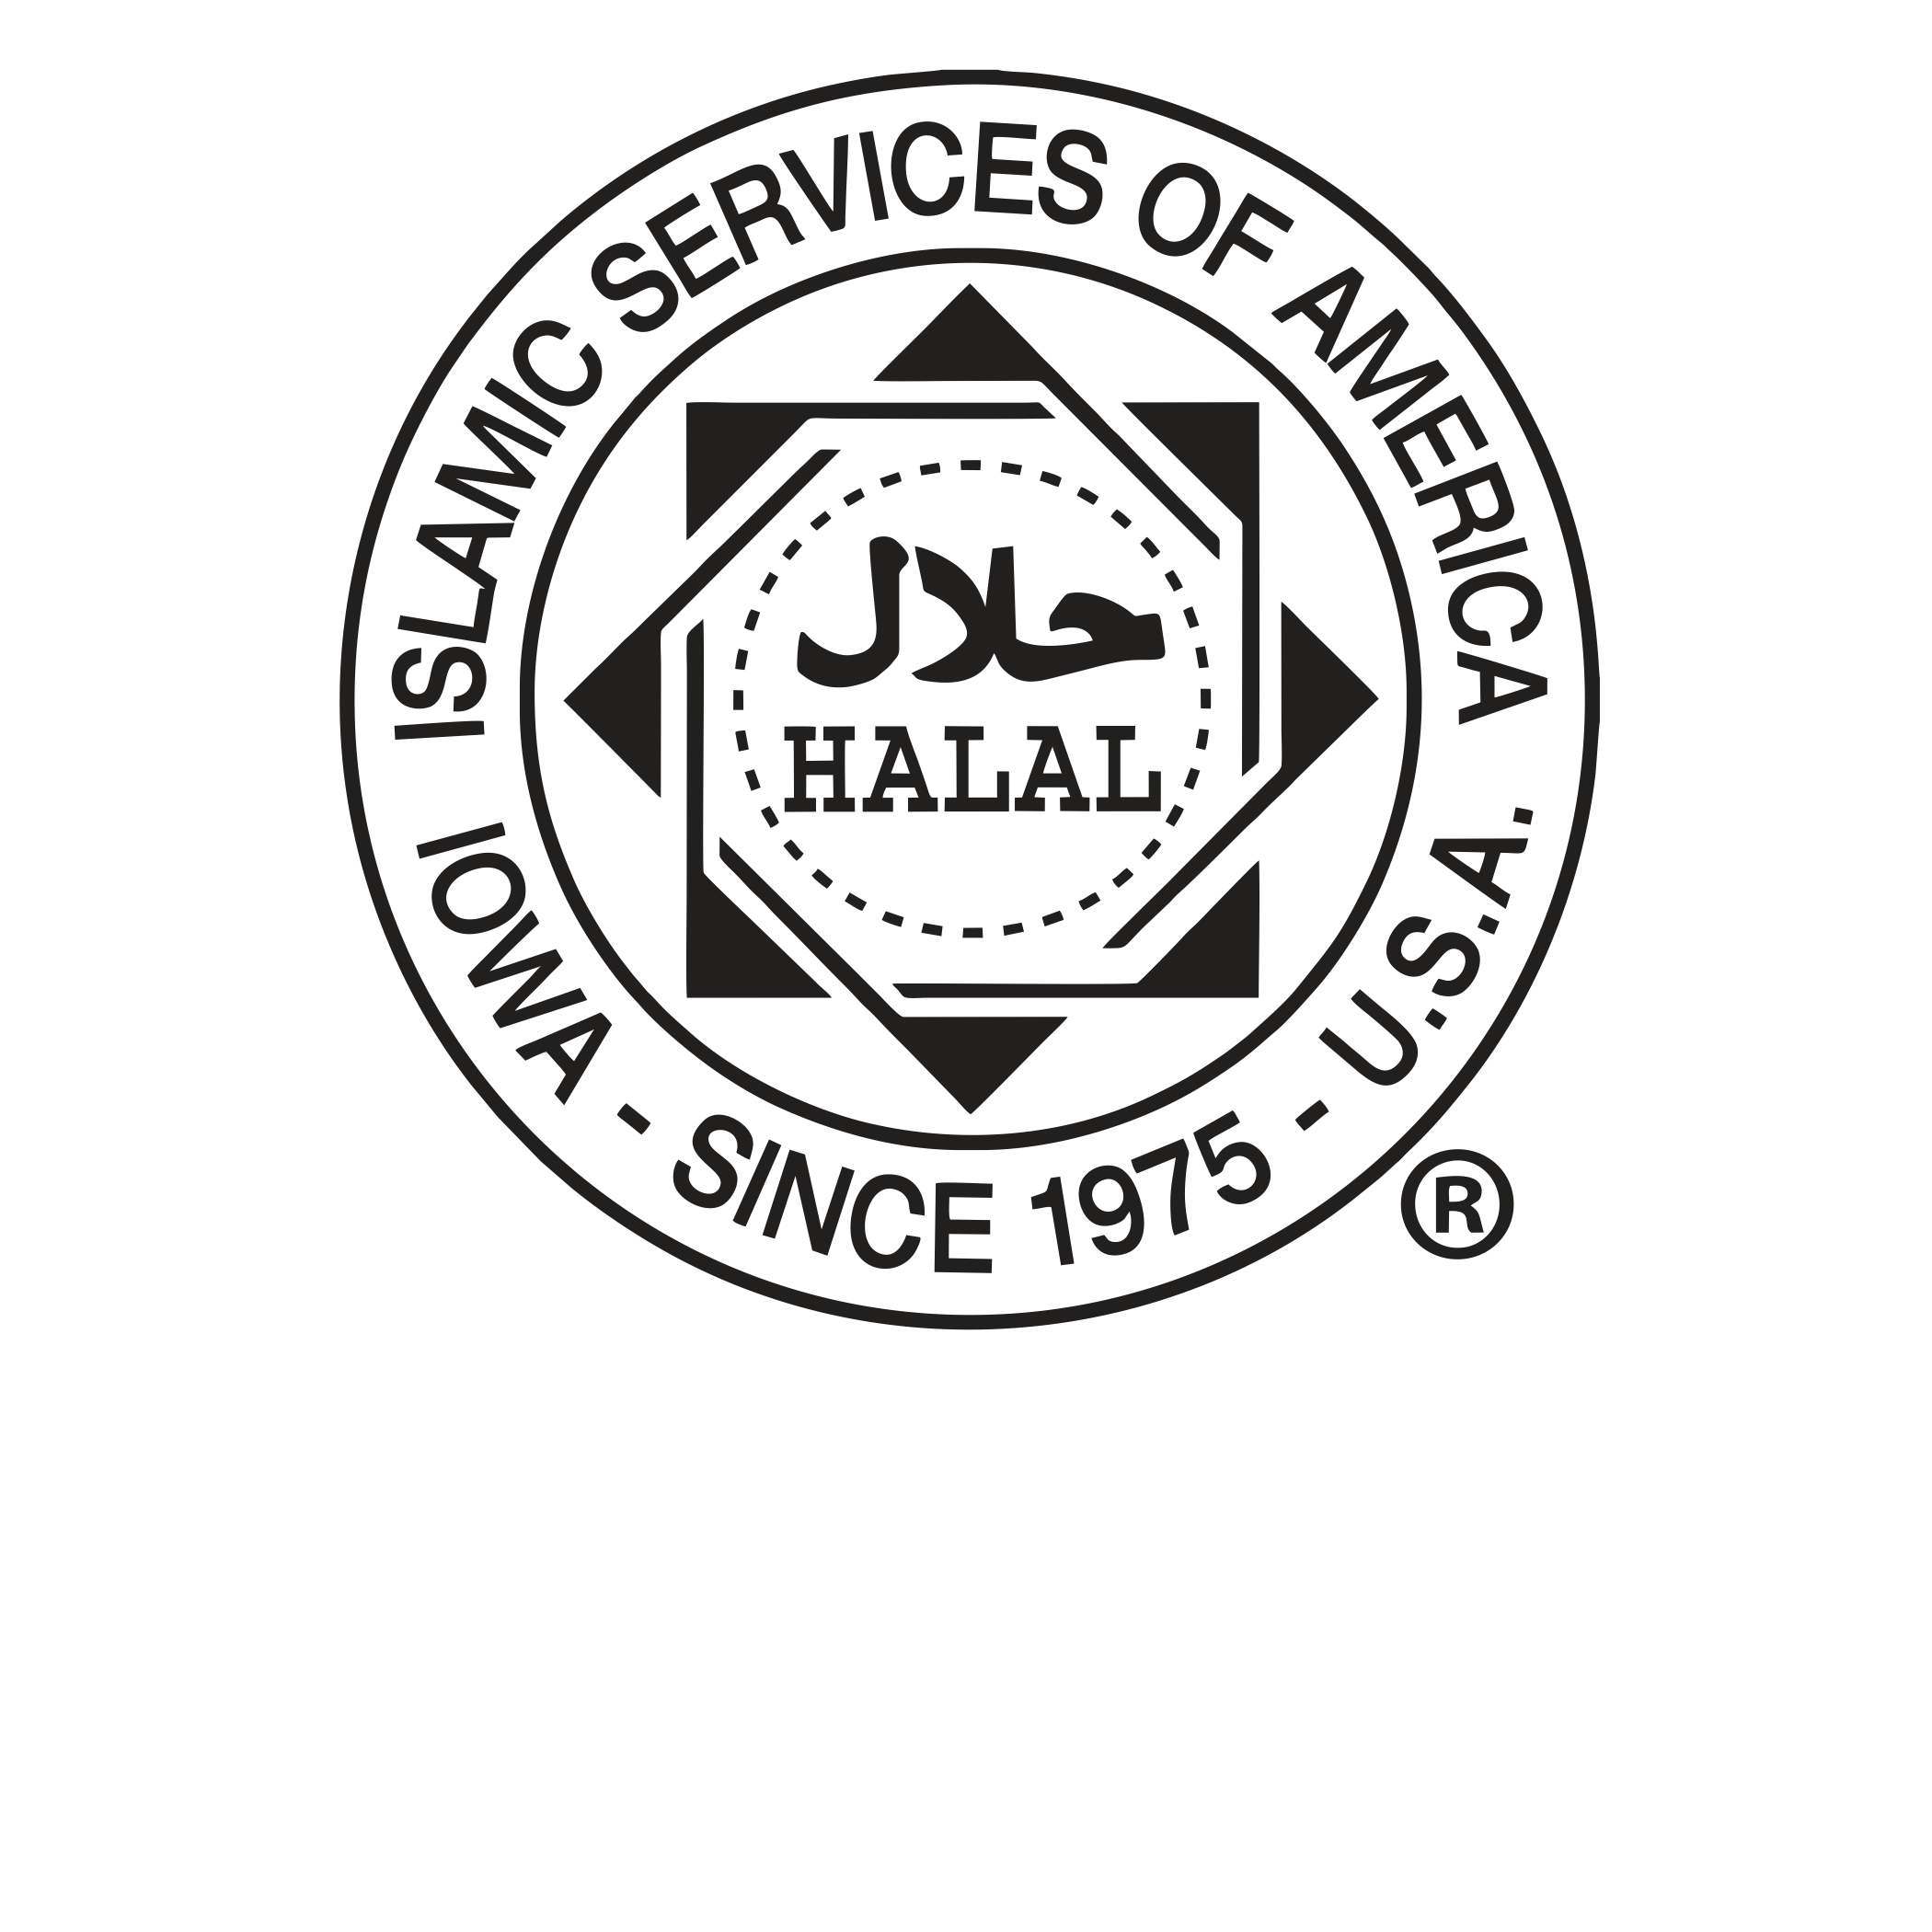 Islamic Services of America halal certified seal